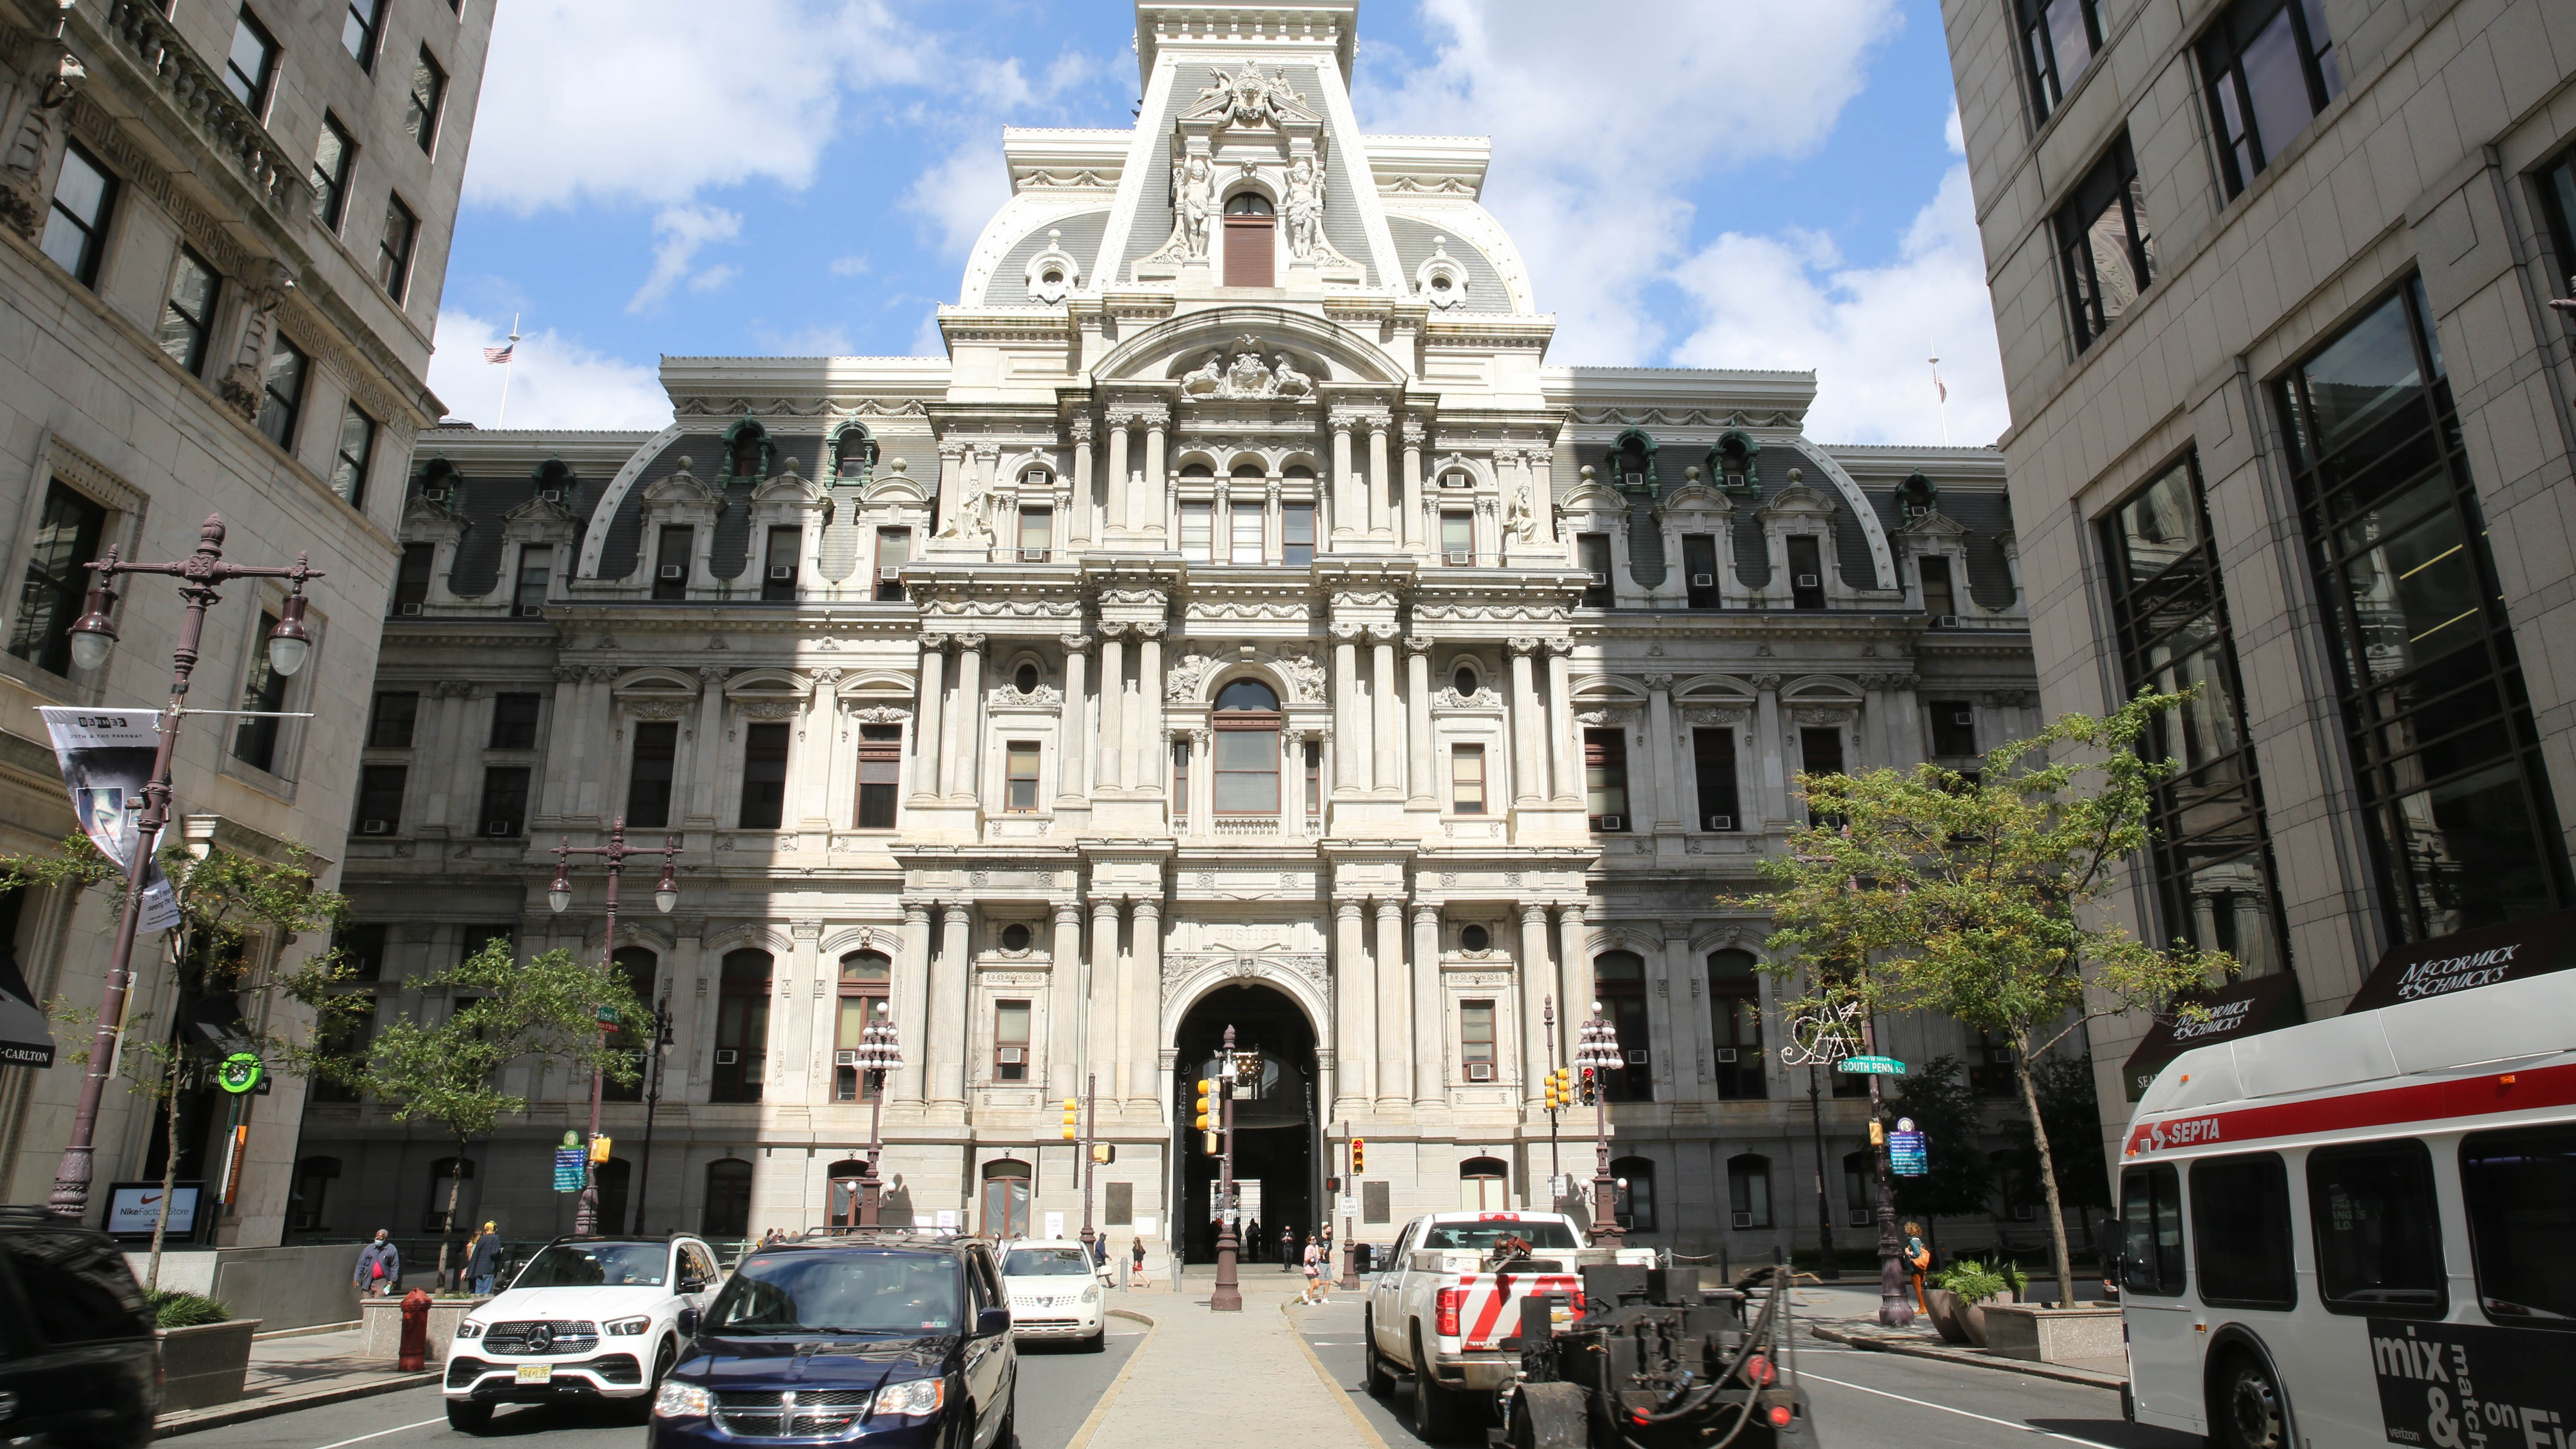 Voters to choose 4 new Philly Council members in special election Tuesday